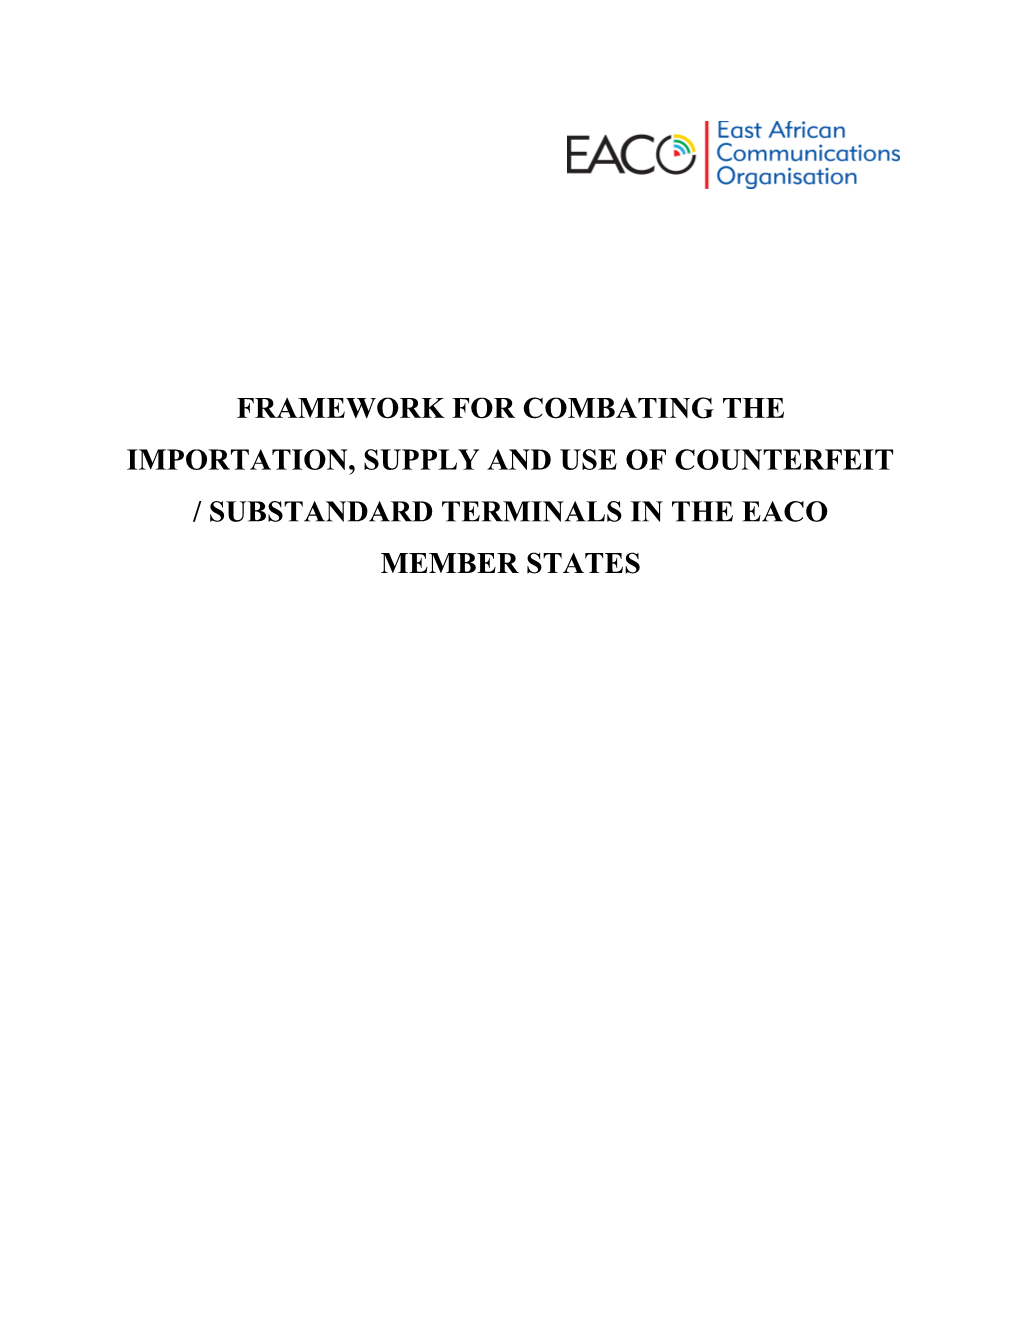 Framework for Combating the Importation, Supply and Use of Counterfeit / Substandard Terminals